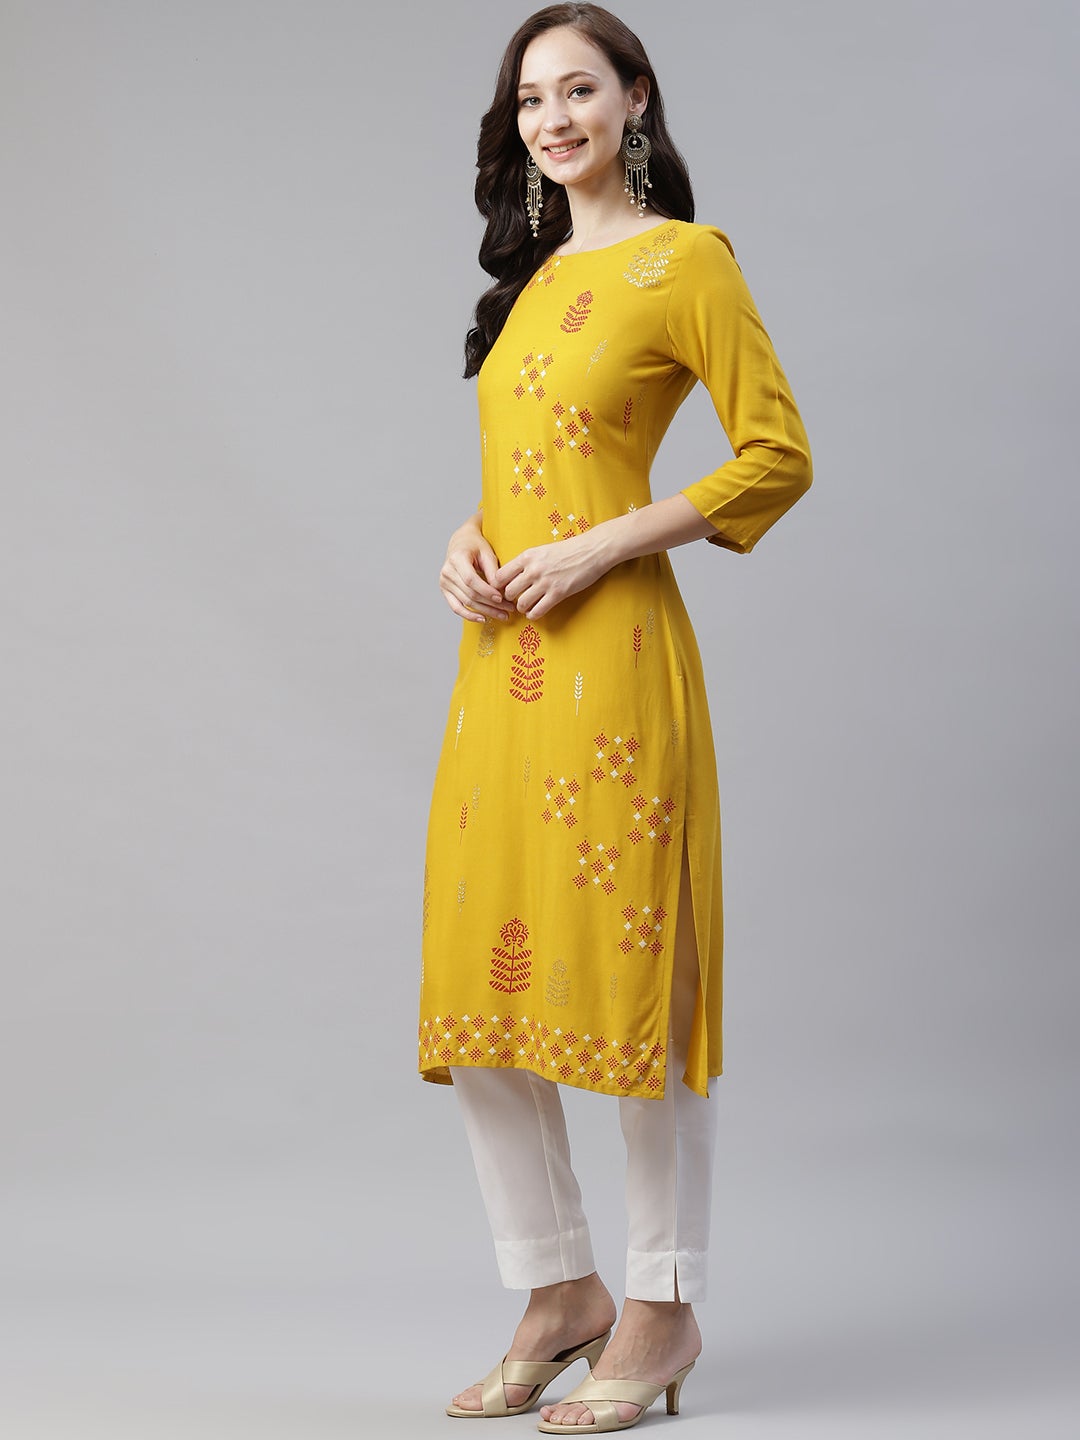 Mindhal Women's Yellow Color Foil Printed Straight Kurta And Pant Set